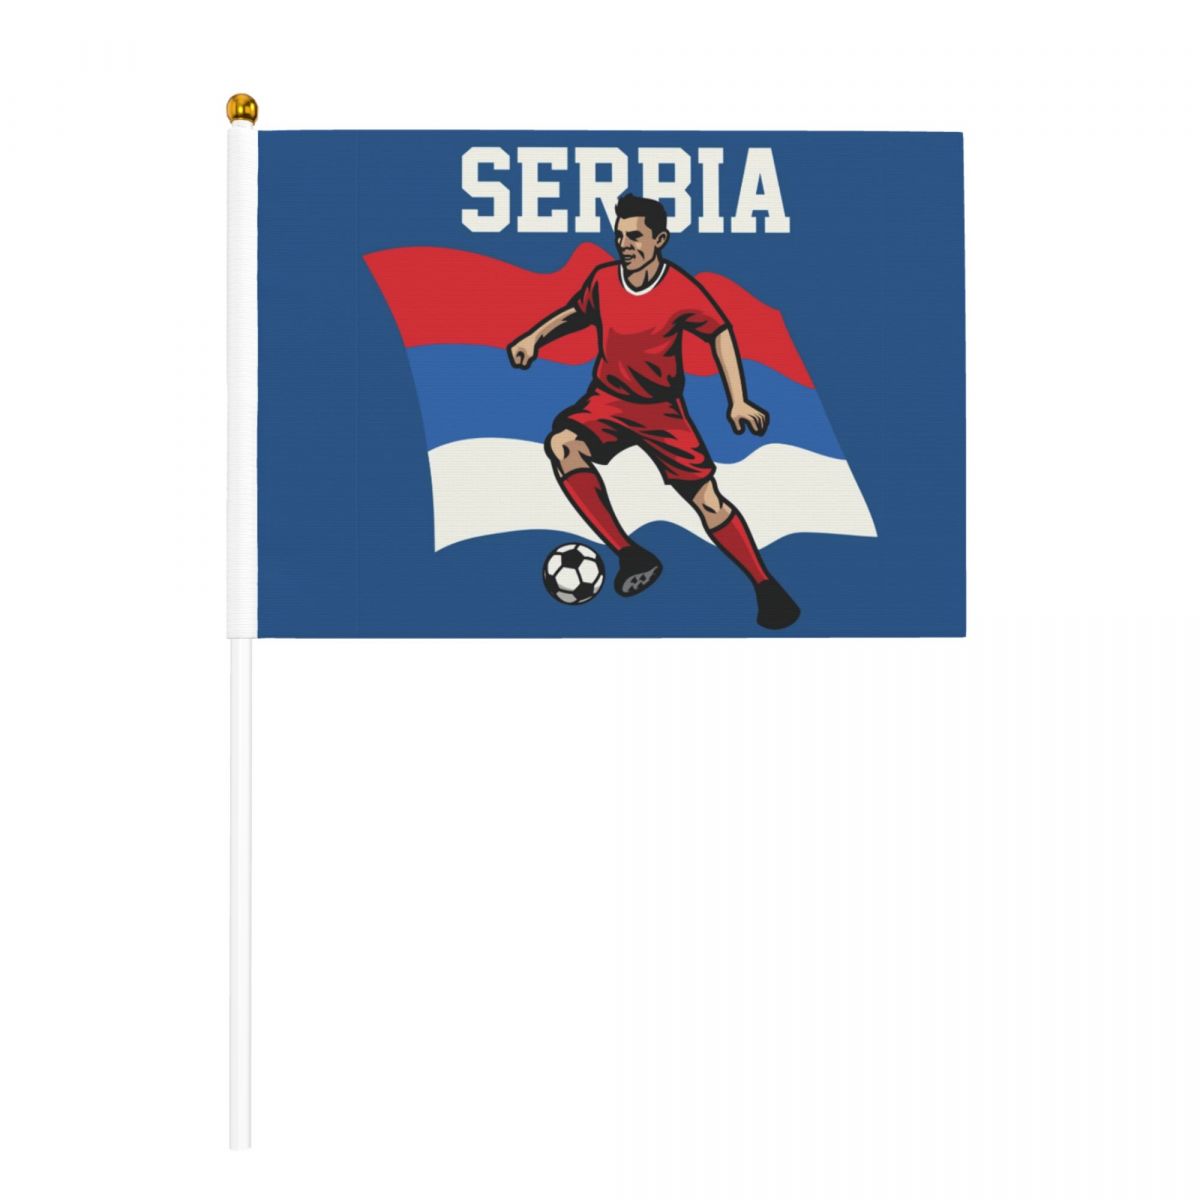 Serbia Soccer Player Hand Held Small Miniature Flags on Stick